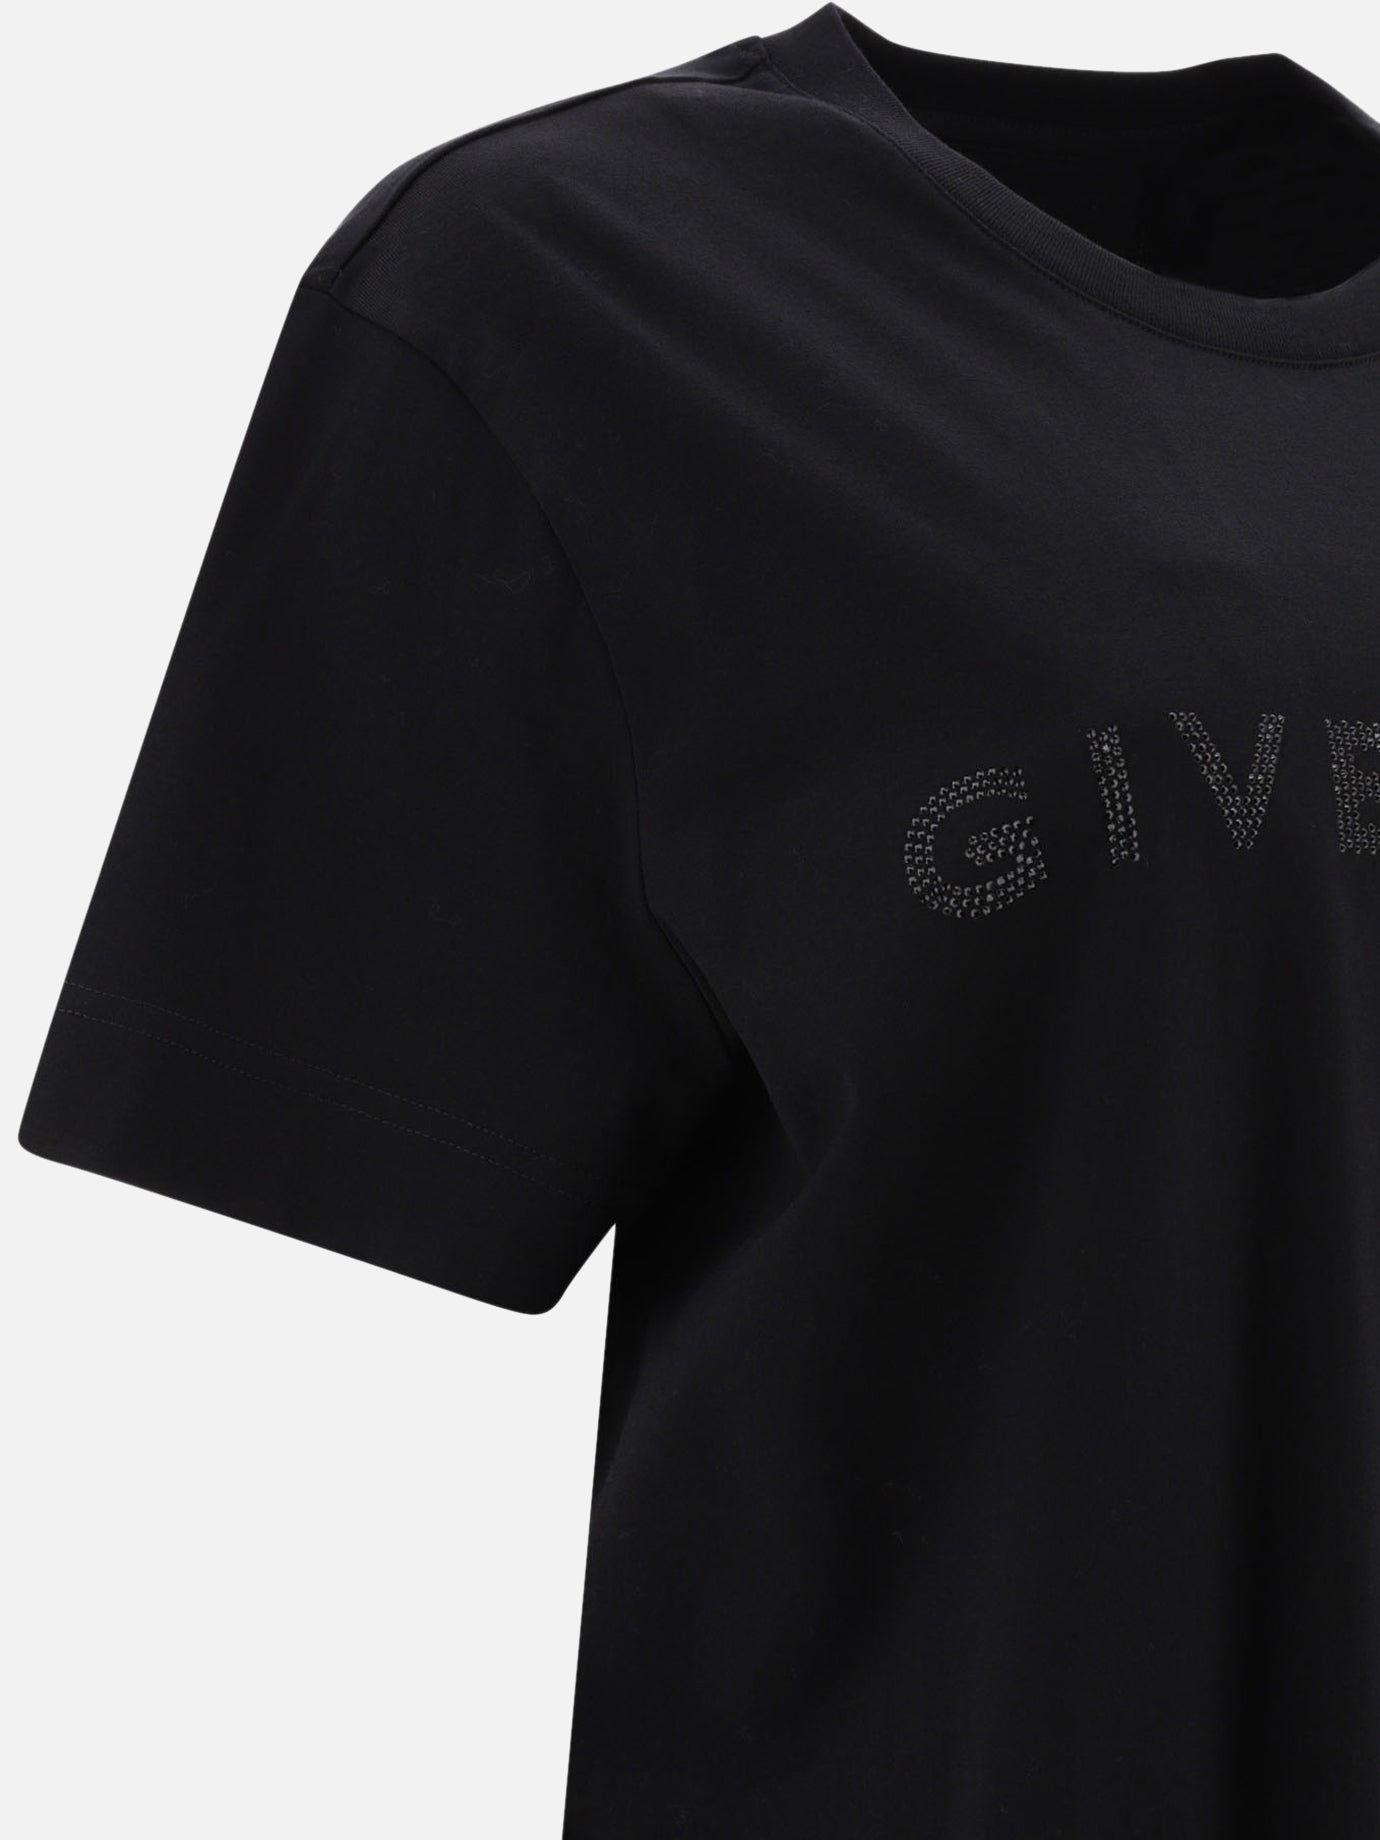 GIVENCHY t-shirt in cotton with rhinestones